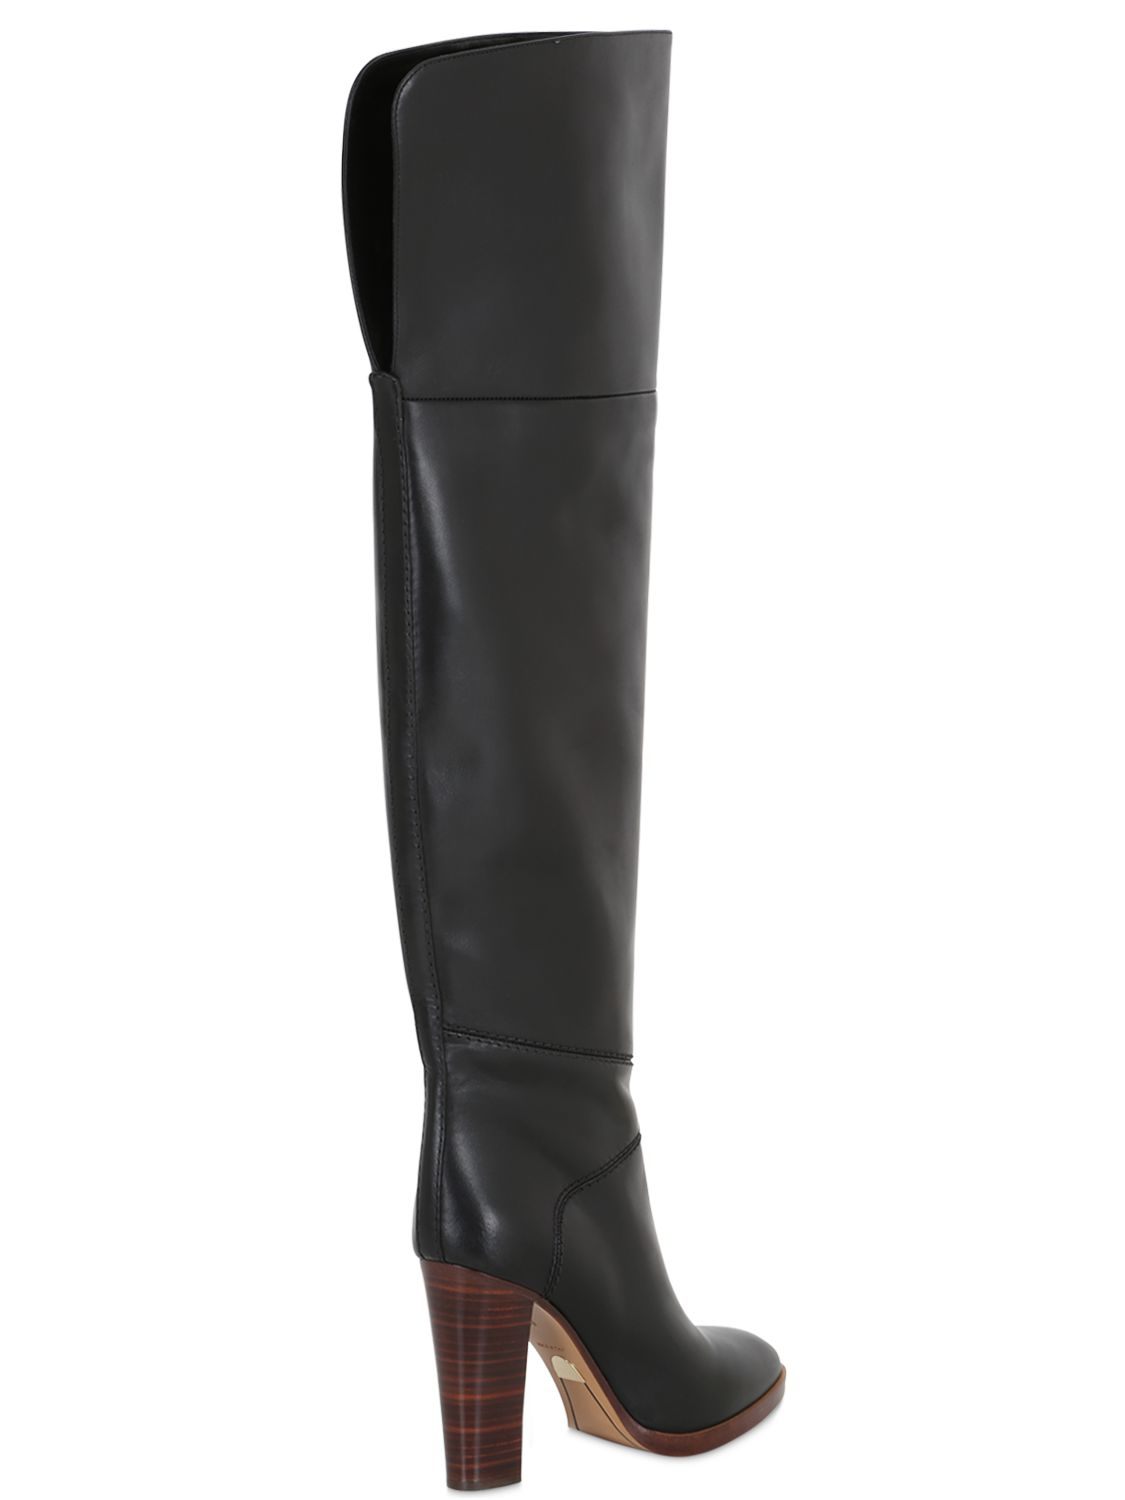 Chloé 105mm Leather Over The Knee Boots in Black | Lyst